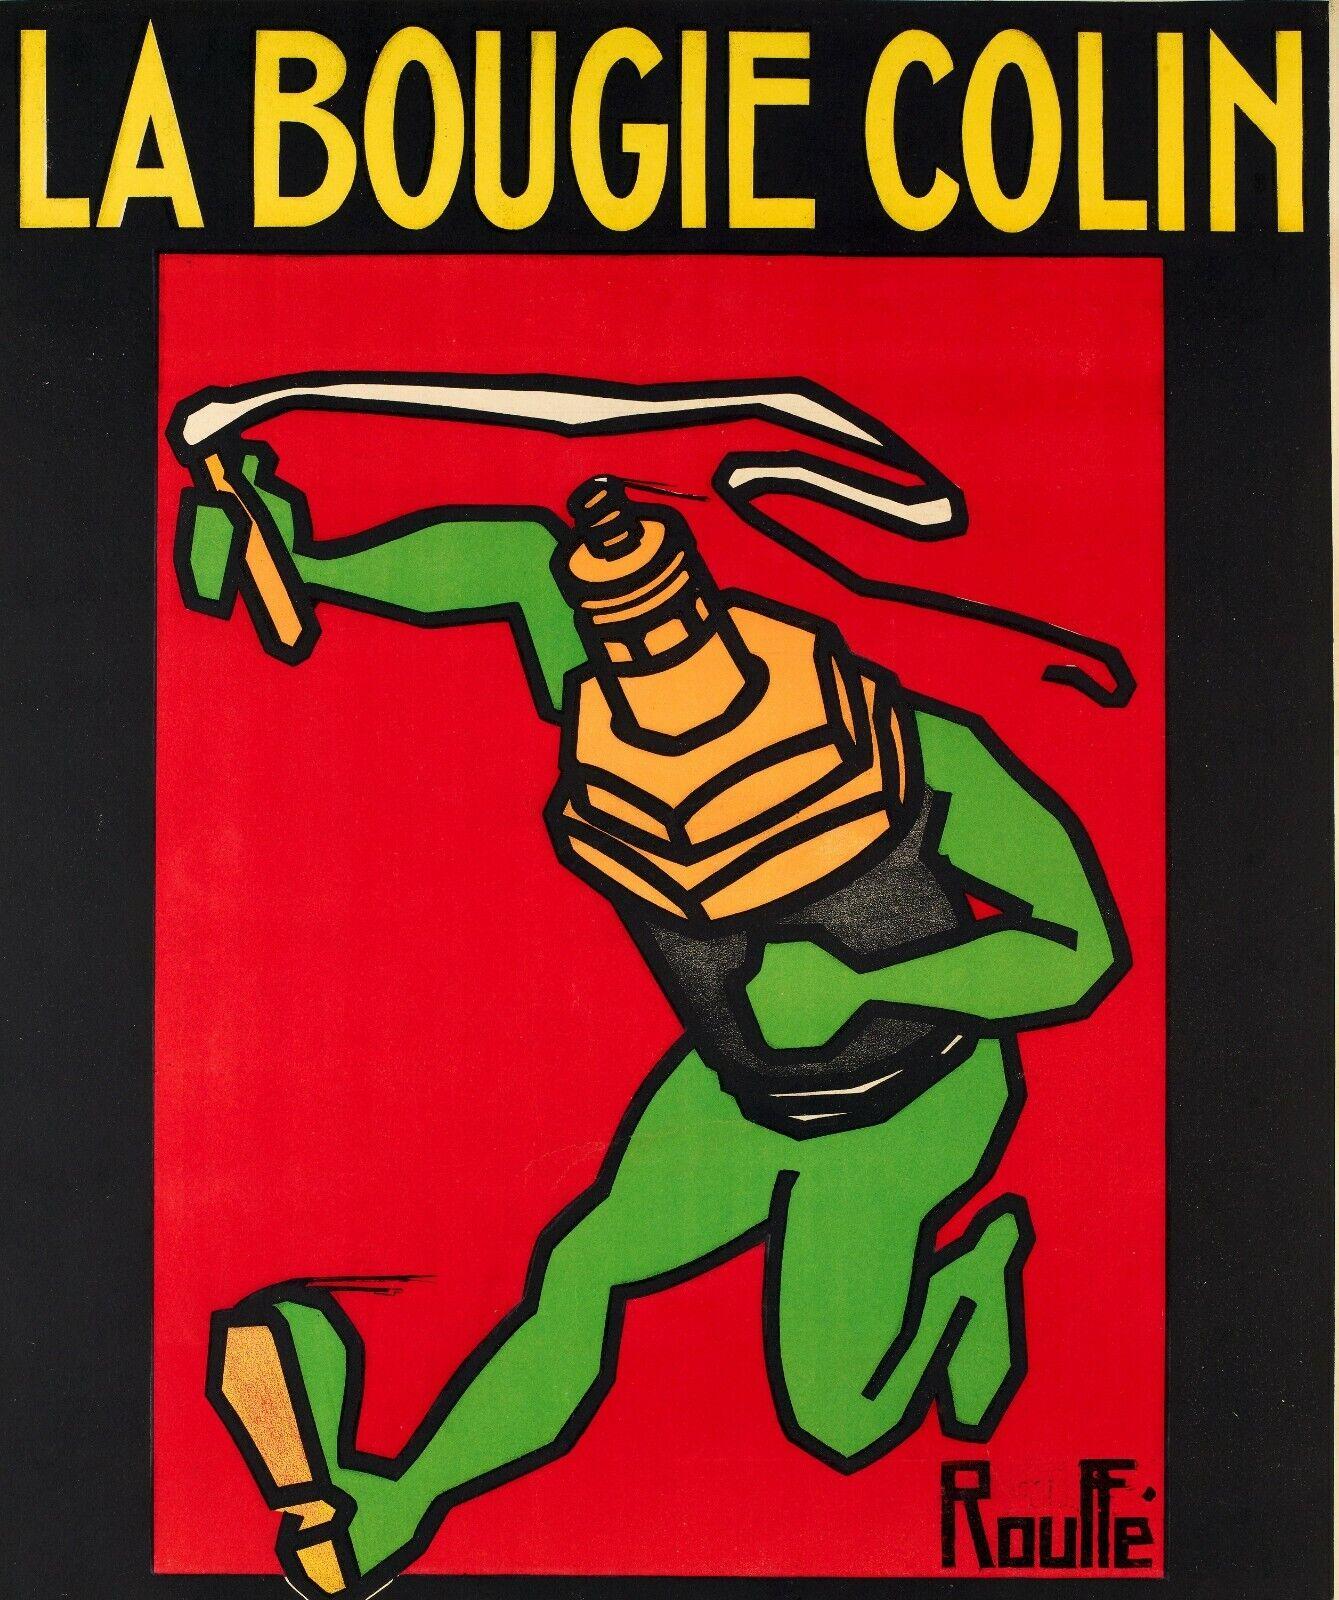 Original Vintage Poster-Rouffé-Colin Candle-Car-Motor, 1930

Advertising for the Colin candle, motor car candle, sold in Paris Office Industriel, 104 bis Bd Voltaire, Paris.

Additional details: 
Materials and Techniques: Colour lithograph on